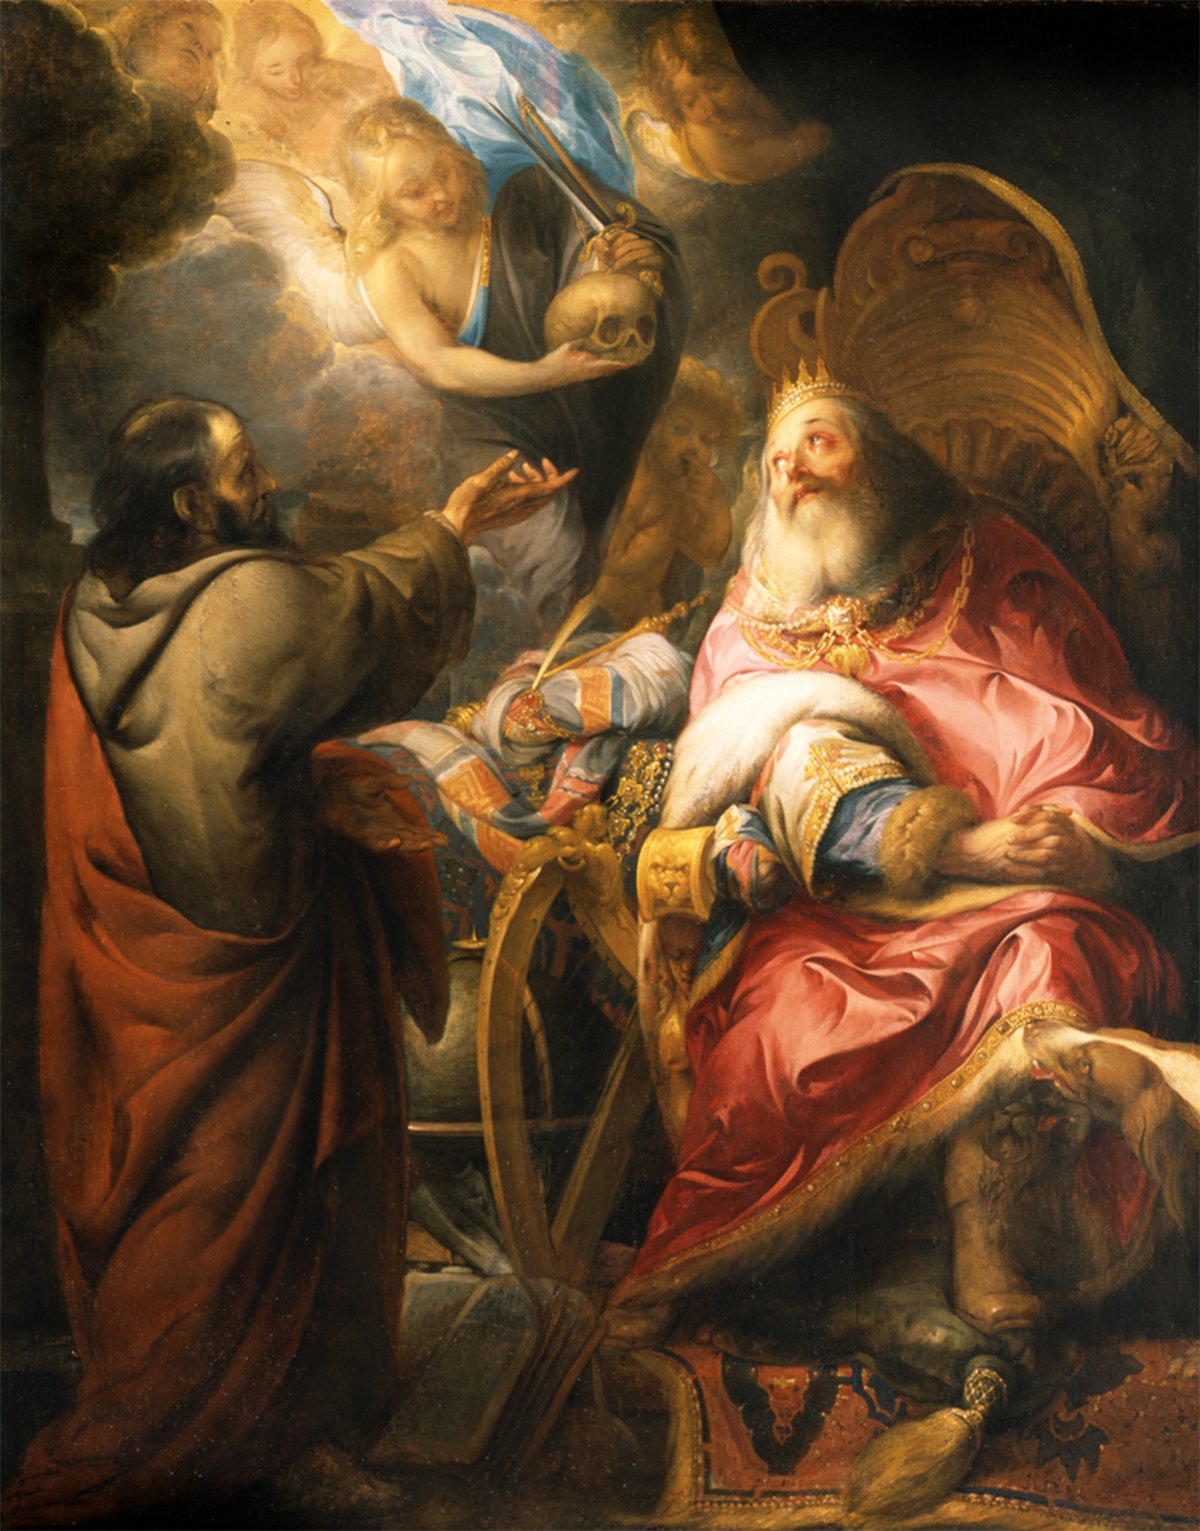 A captivating painting from 1650 by an unknown Flemish artist titled 'The Repentant King David'. The scene portrays King David, adorned in opulent regal attire, seated on a golden throne. He looks up with a remorseful expression, captivated by an angelic figure above him who gracefully extends a skull towards him as a symbol of mortality. To David's left, a figure draped in humble brown robes, possibly a prophet or advisor, gestures towards the heavenly vision. A backdrop of dark, moody clouds gives way to divine light, illuminating cherubic faces that watch the scene unfold. The richly detailed setting, from the intricate throne to the lavish carpet and draperies, underscores the drama and gravity of the moment.